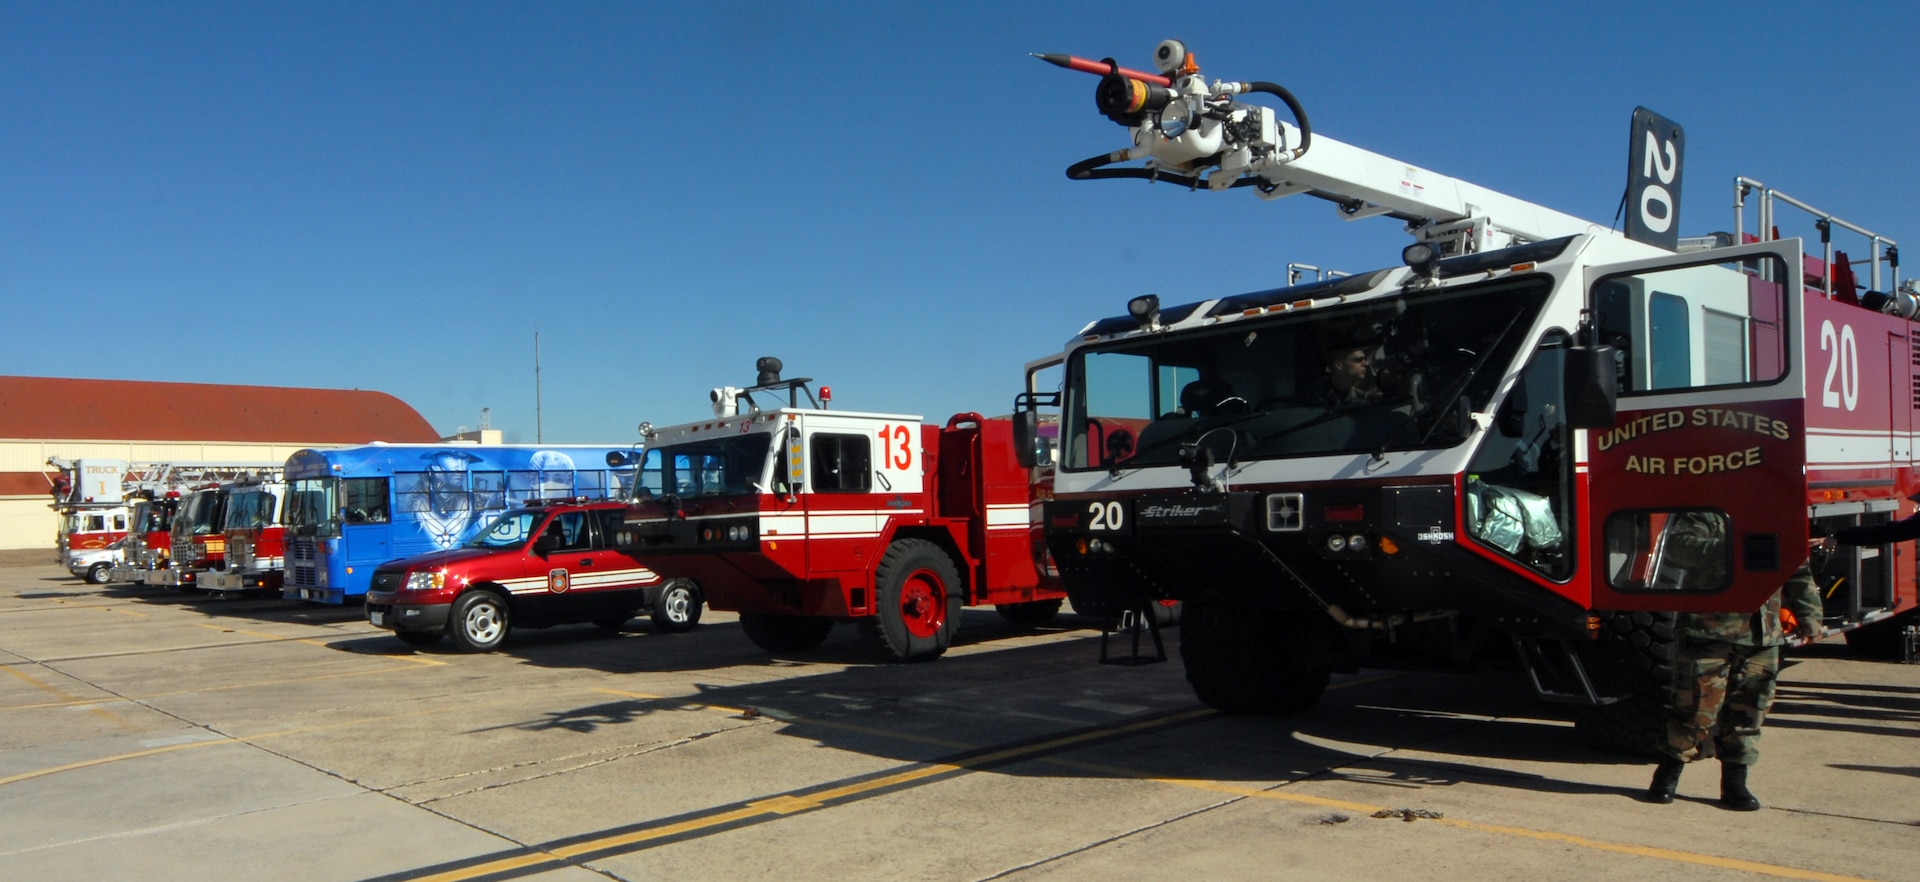 Randolph emergency vehicles stand at the ready during a training session with local emergency responders Feb. 1. Several local fire departments visited Randolph to train on proper response procedures to downed 12th Flying Training Wing aircraft in the event one crashed in their city. (U.S. Air Force photo by Steve White)